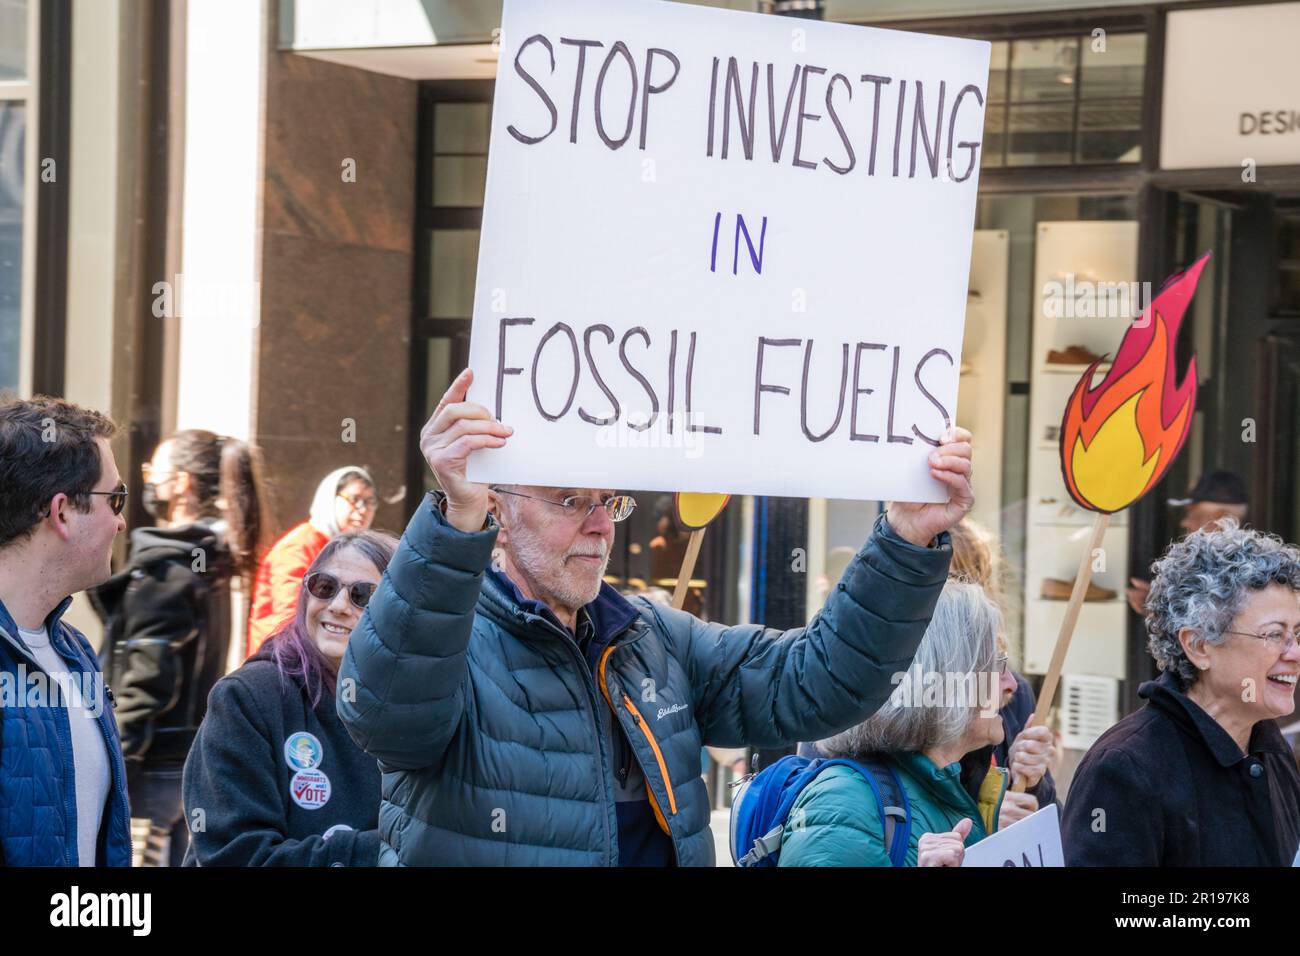 Boston, MA, US-March 21, 2023: Protesters at the National Day of Action to Stop Dirty Banks action sponsored by Bill McKibben's organization Third Act Stock Photo